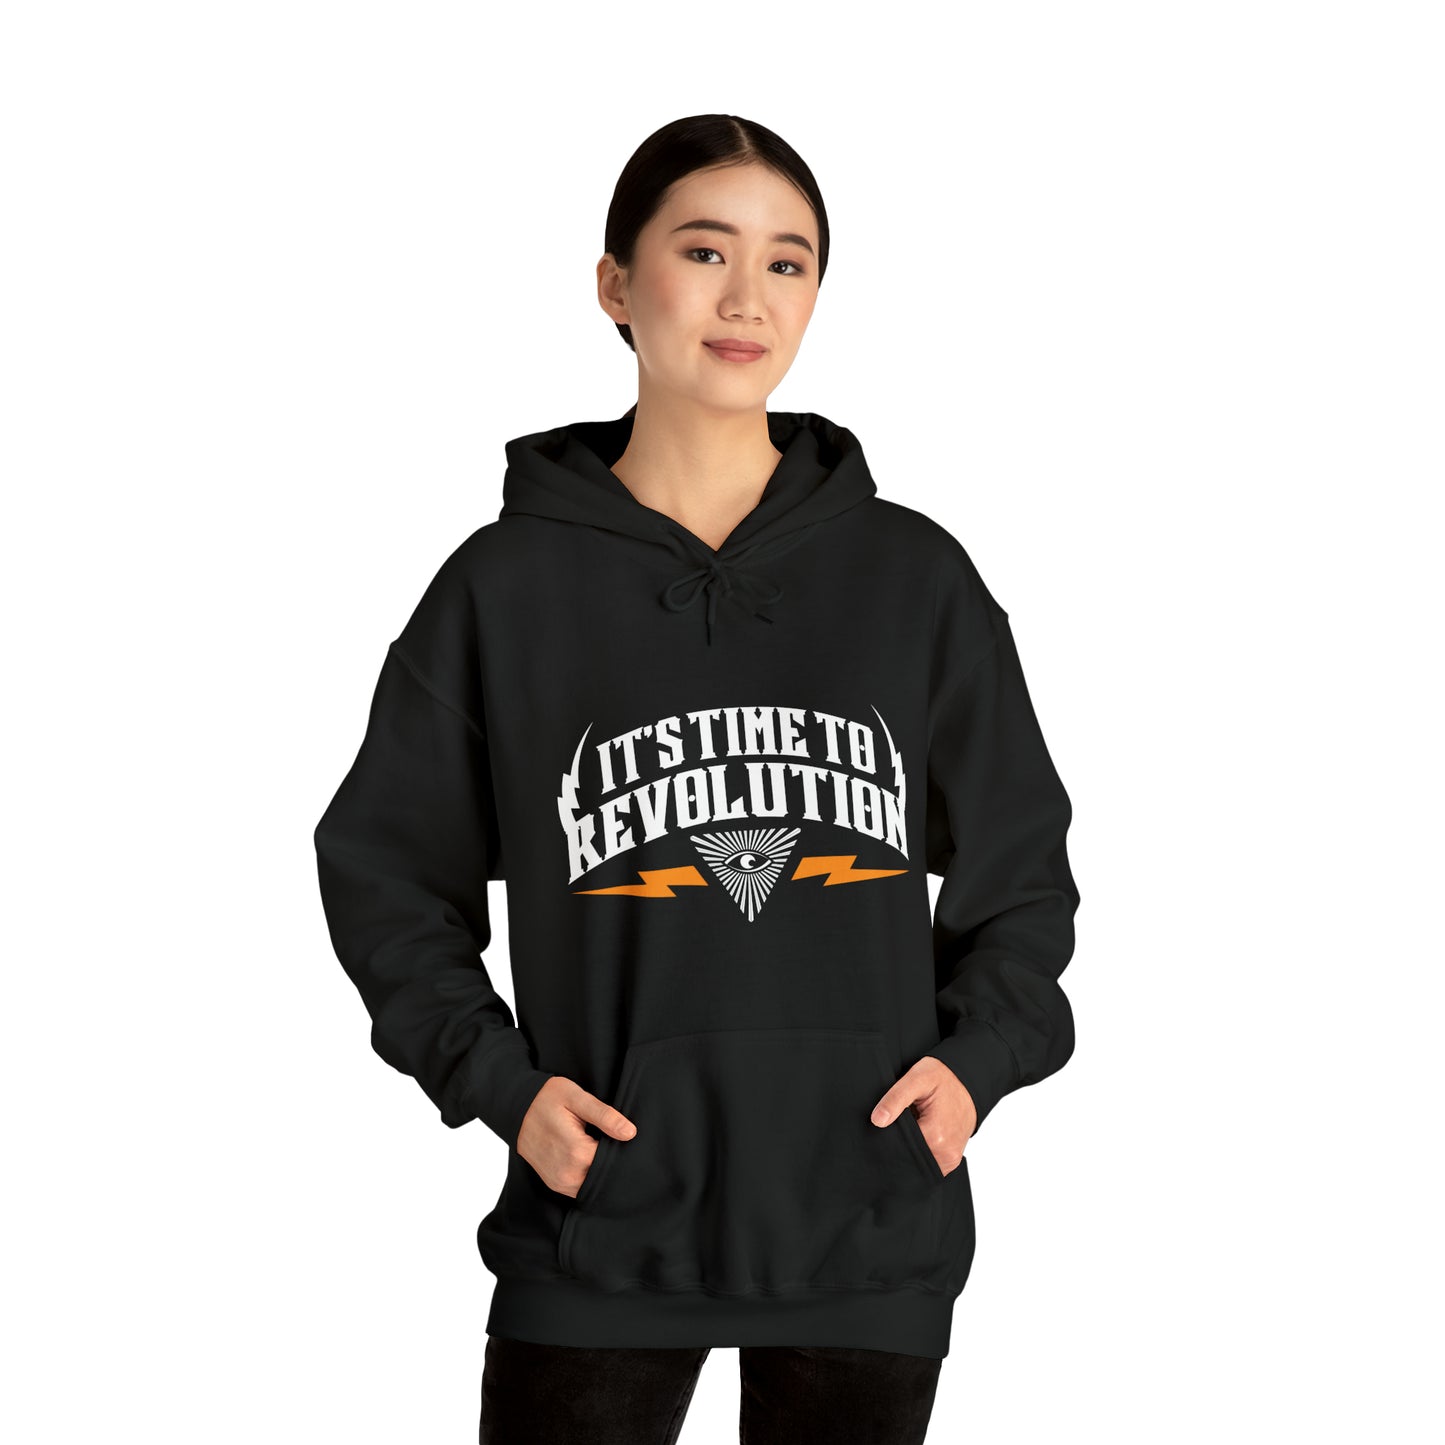 It's Time To Revolution Unisex Heavy Blend Hoodie